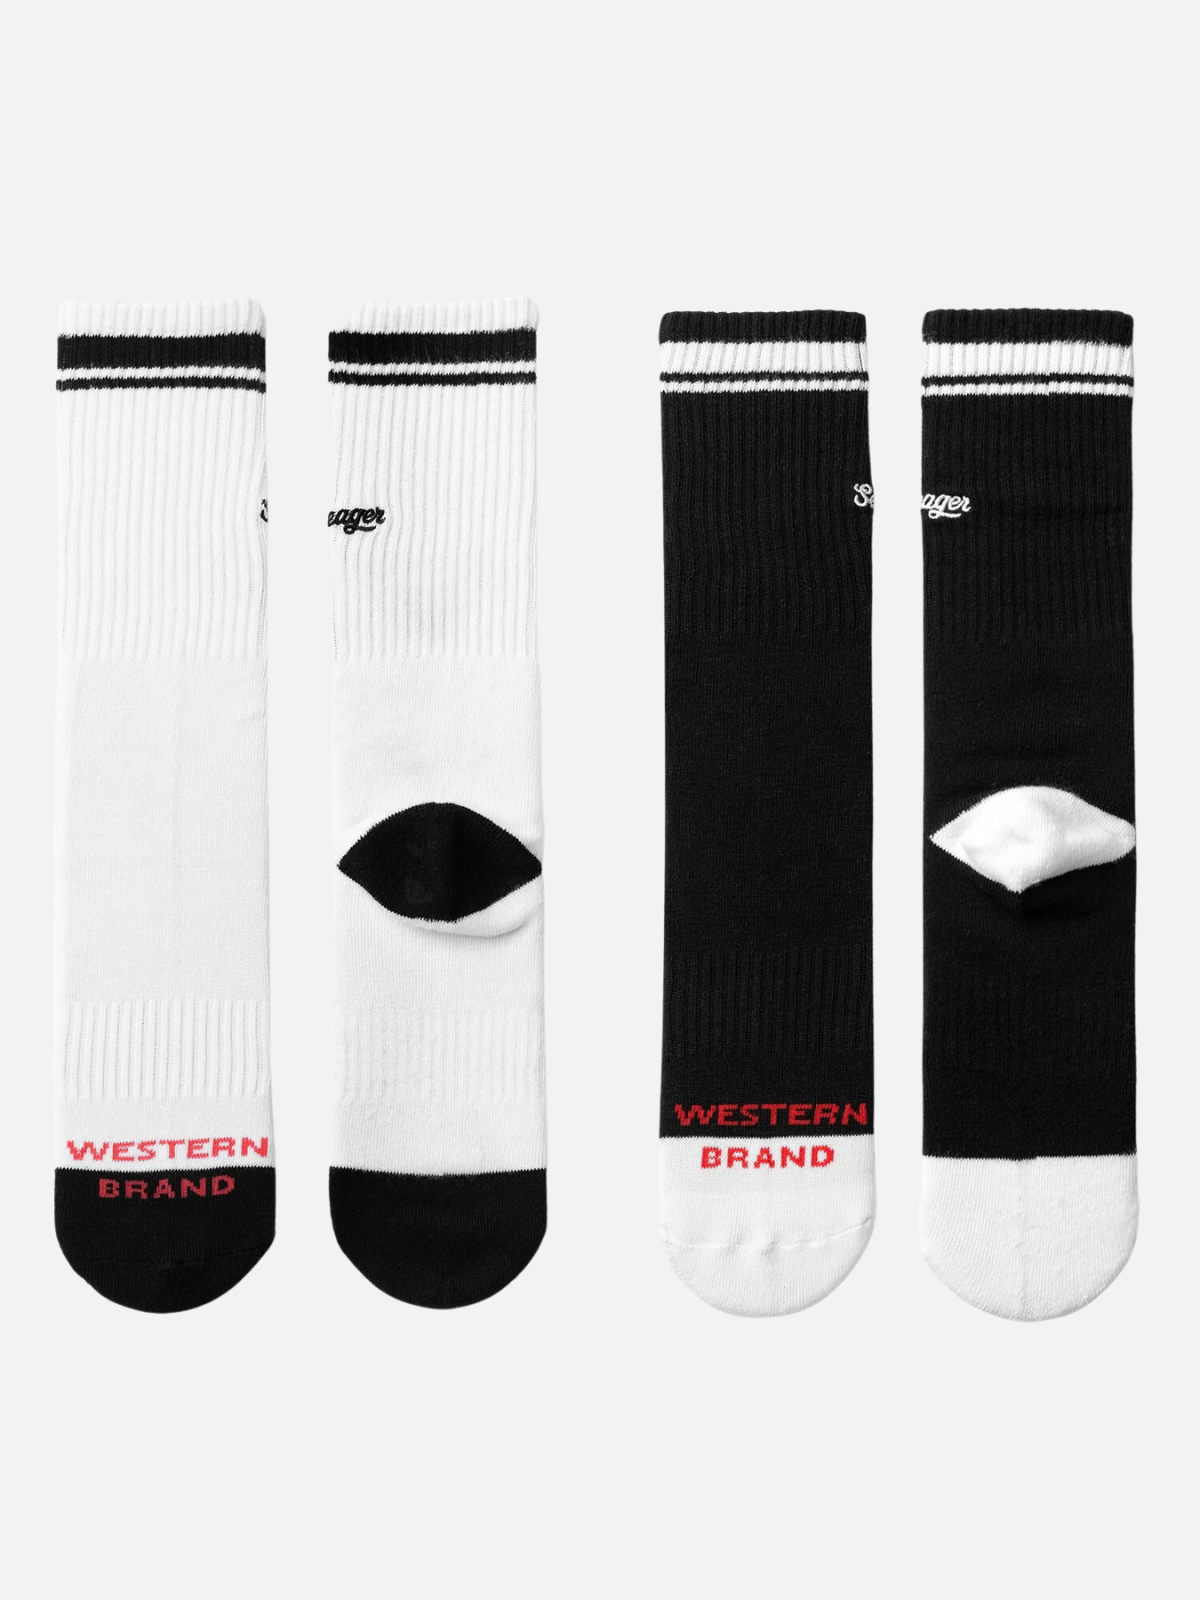 seager daily crew socks 2 pack black and white cotton Kempt mens wear store athens ga Seager Daily Crew Socks Embroidered Western Brand Athletic Socks Kempt Mens Clothing Store Downtown Athens Georgia Shopping